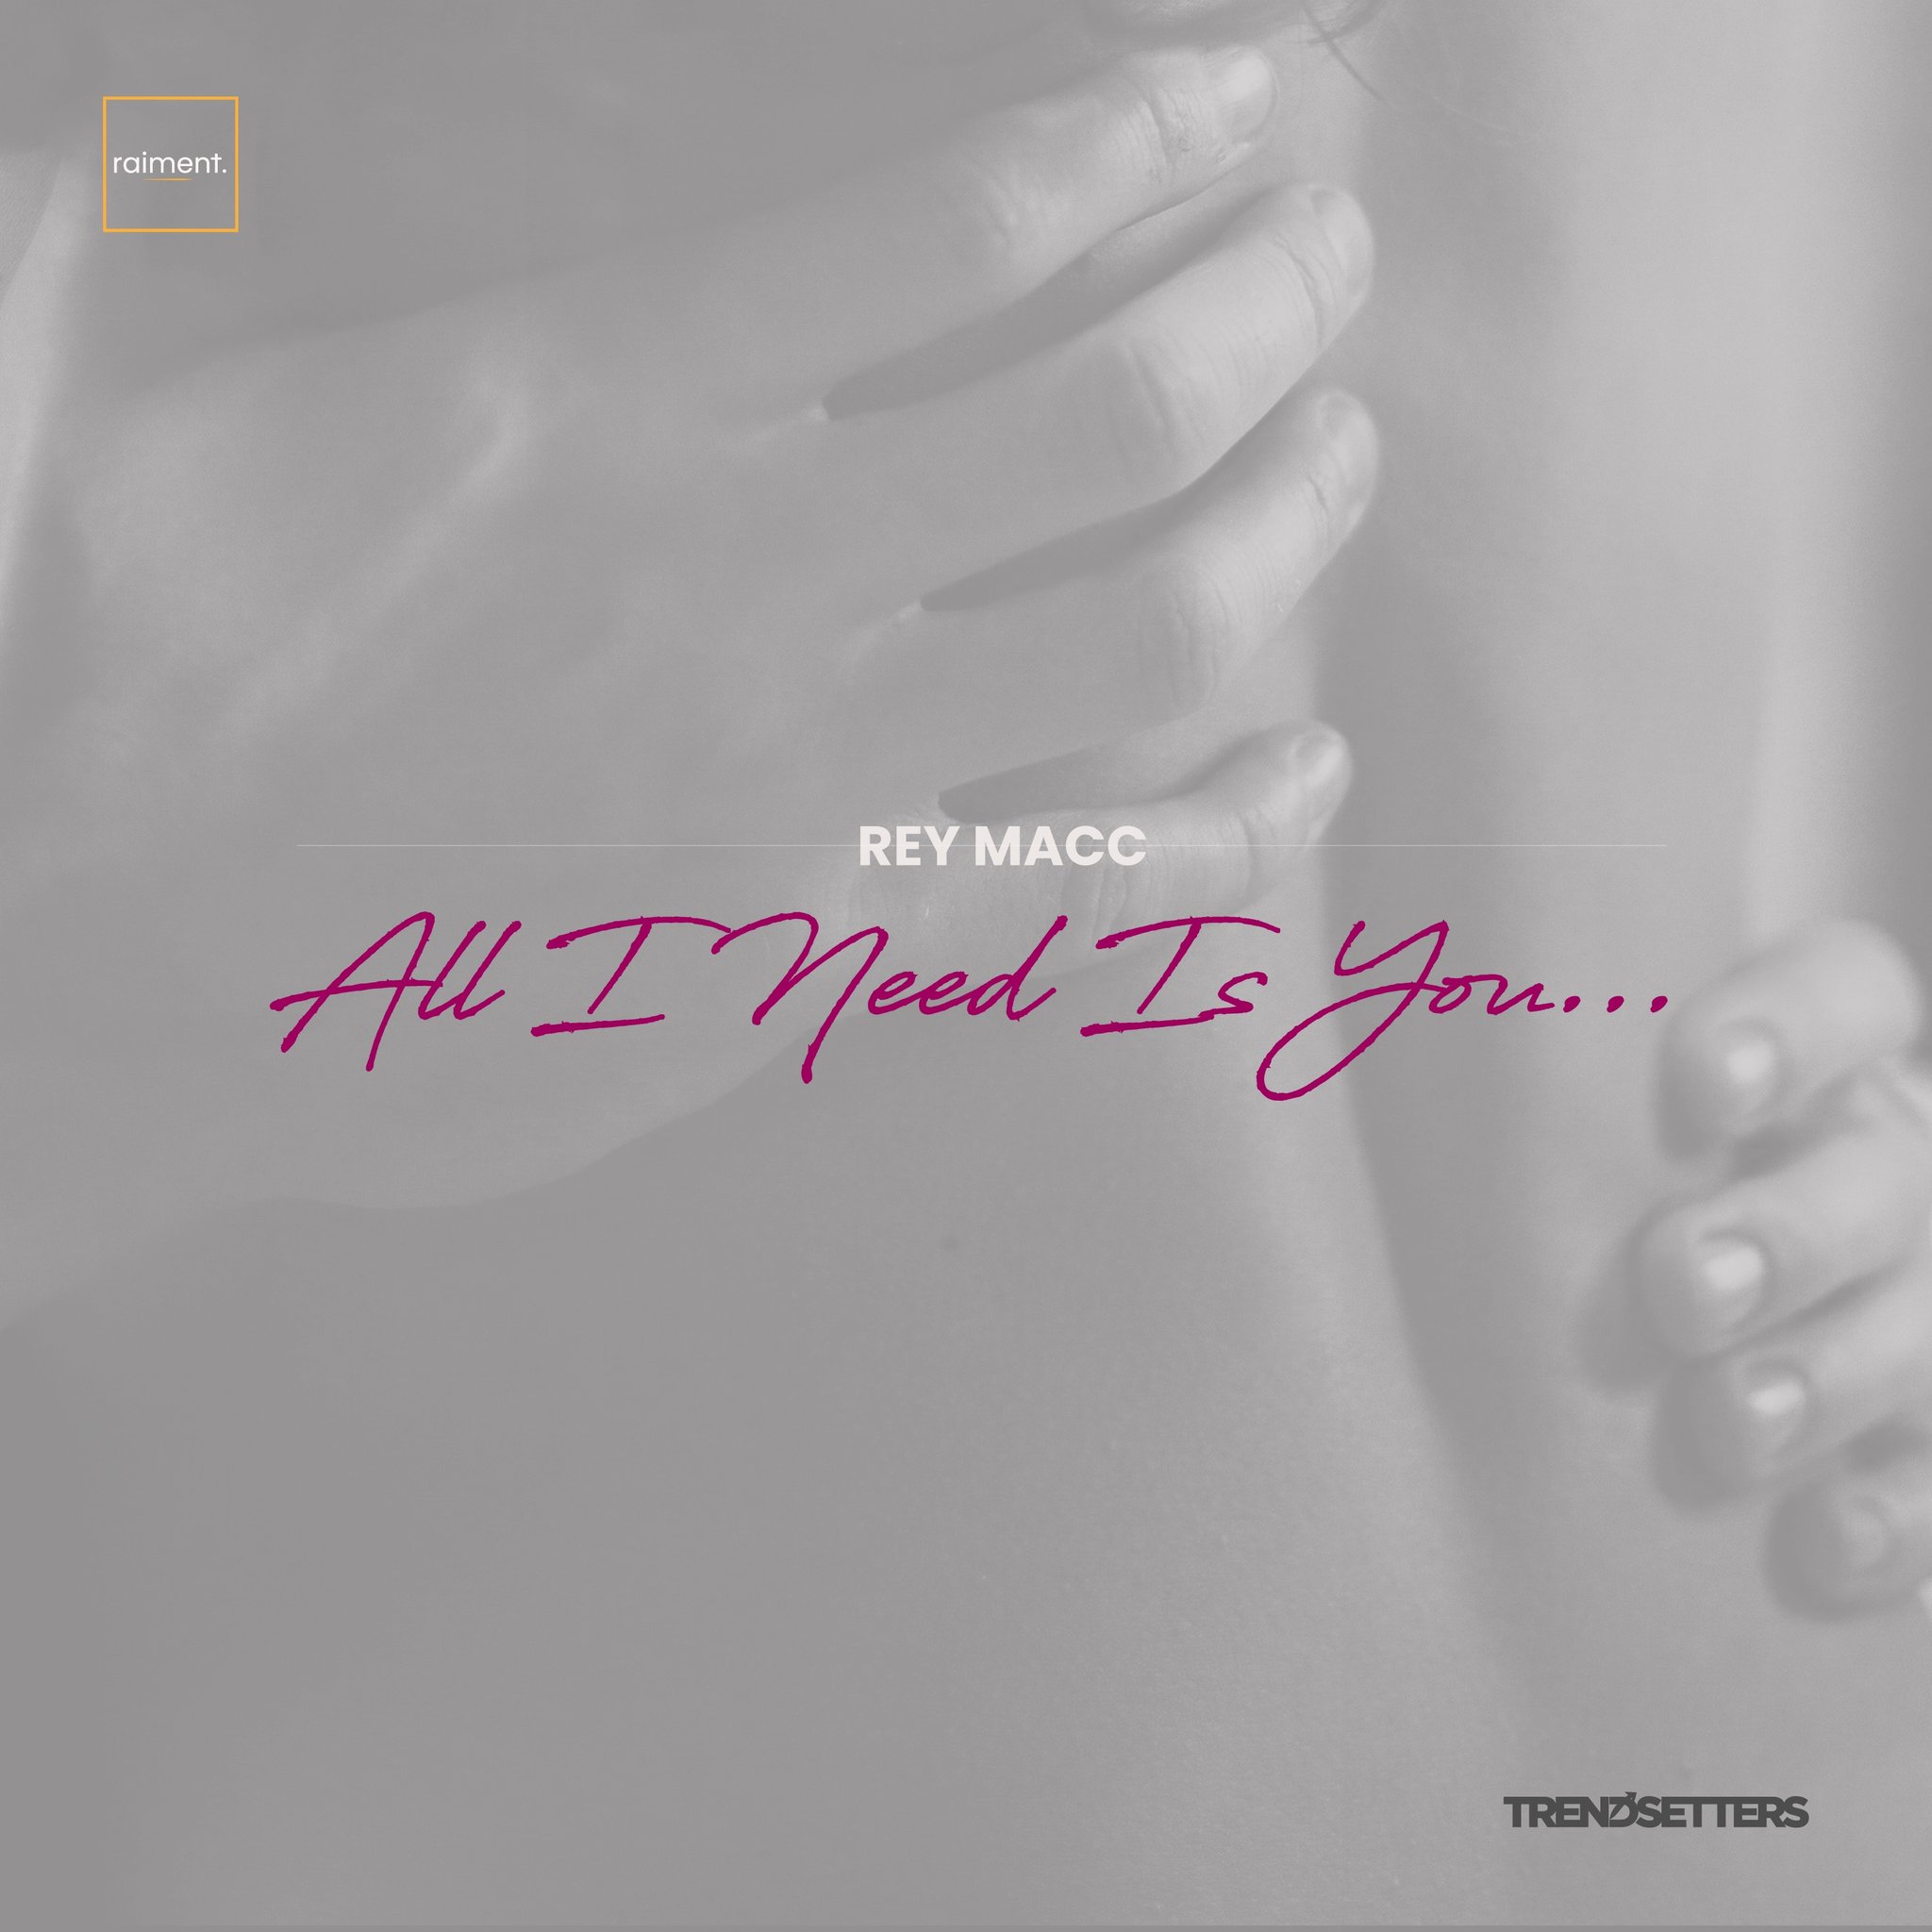 Listen to “All I Need is You” – Rey Macc